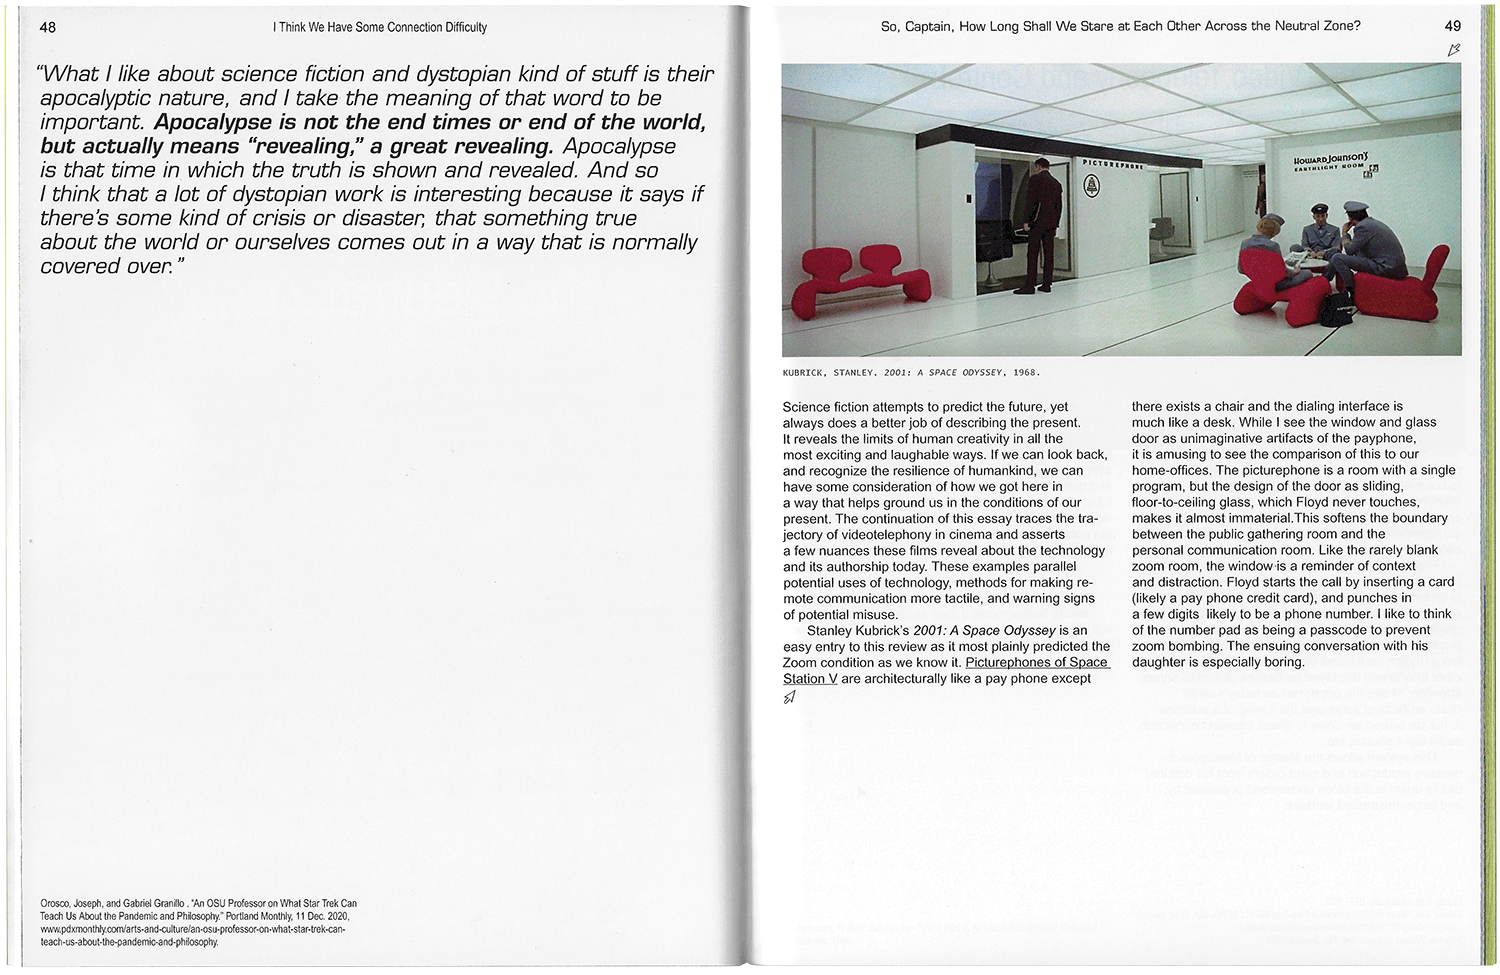 interior spread of book with image from Stanley Kubrick's 20001: A Space Odyssey.